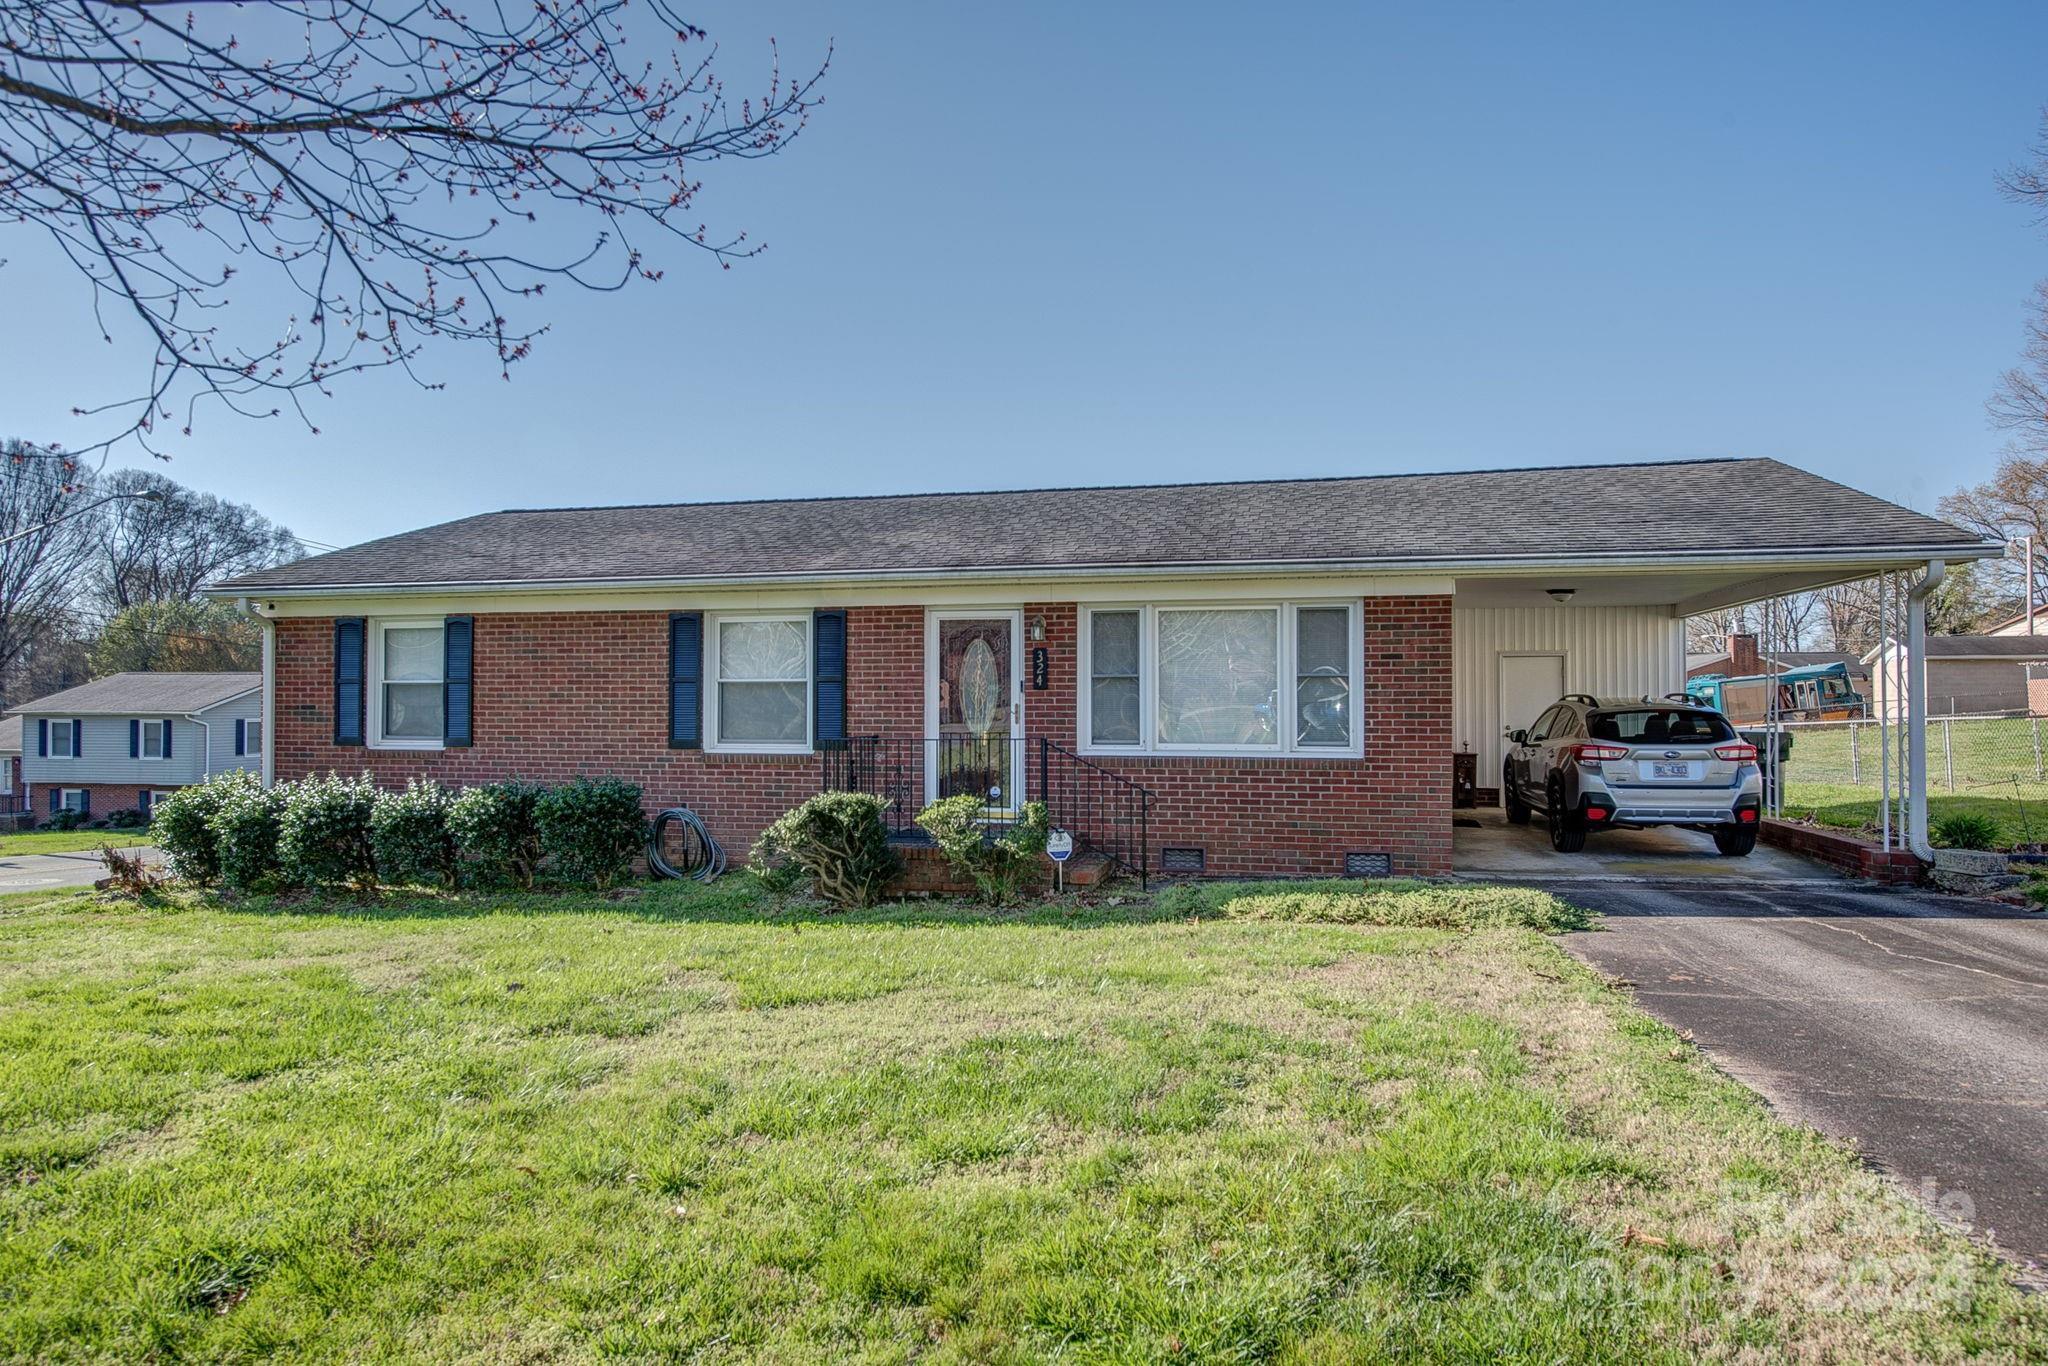 Photo one of 324 Bright Ave Bessemer City NC 28016 | MLS 4120598